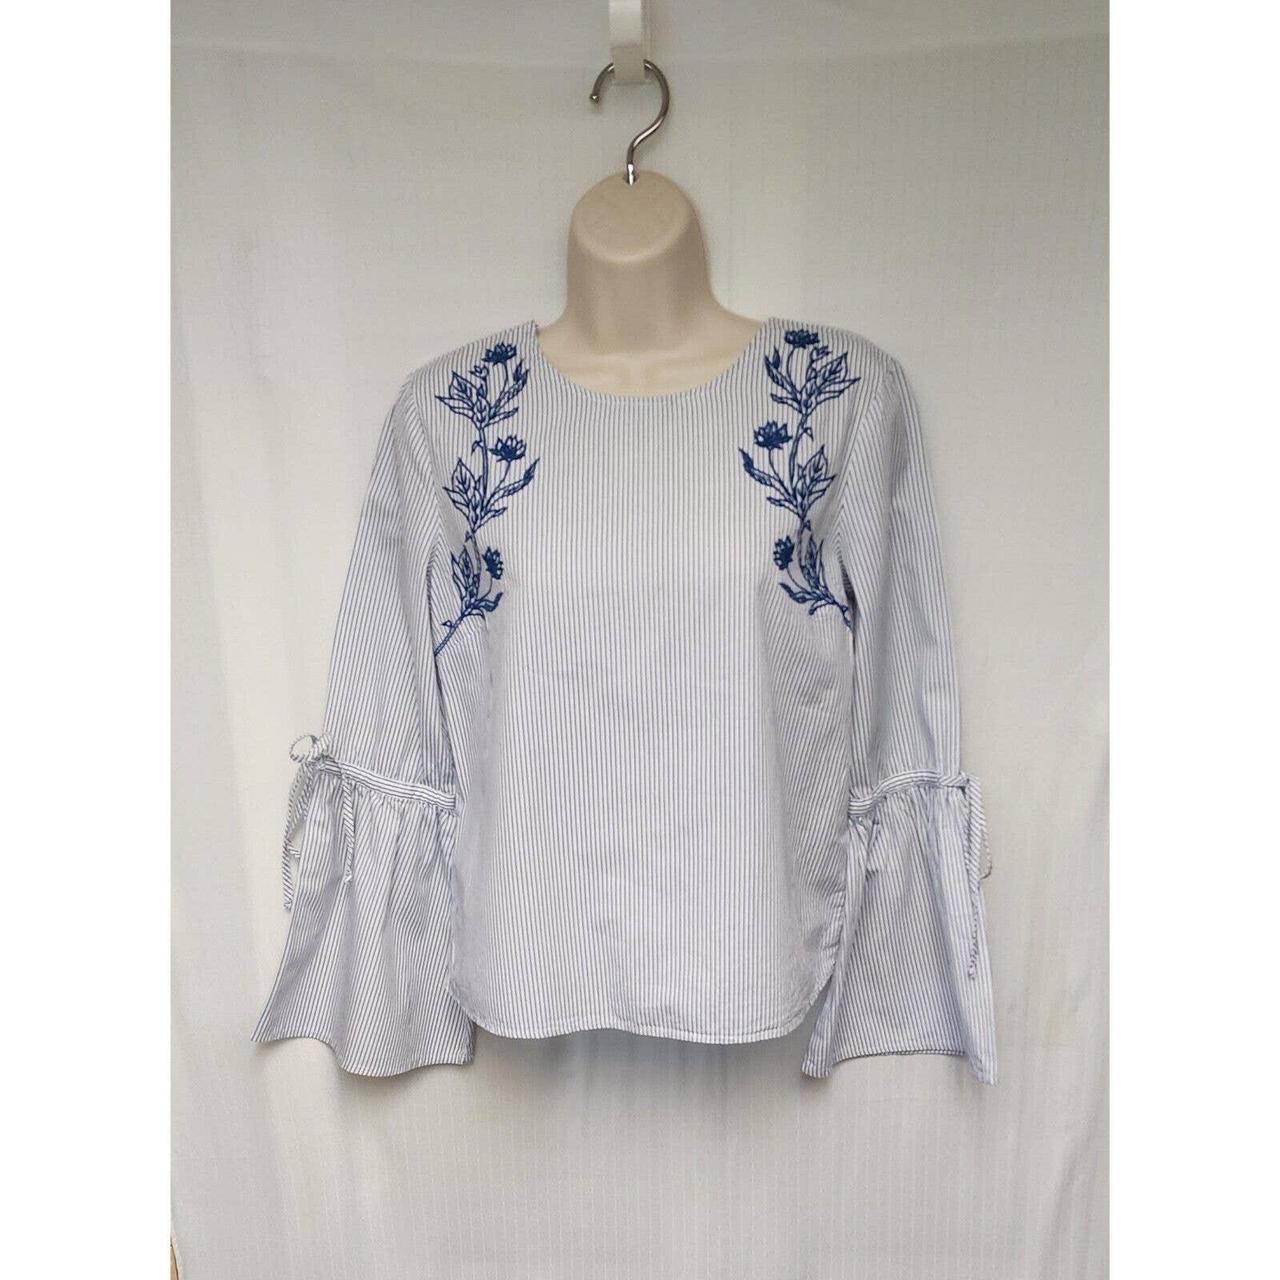 Dizzy Lizzy Women's Blue and White Blouse (2)